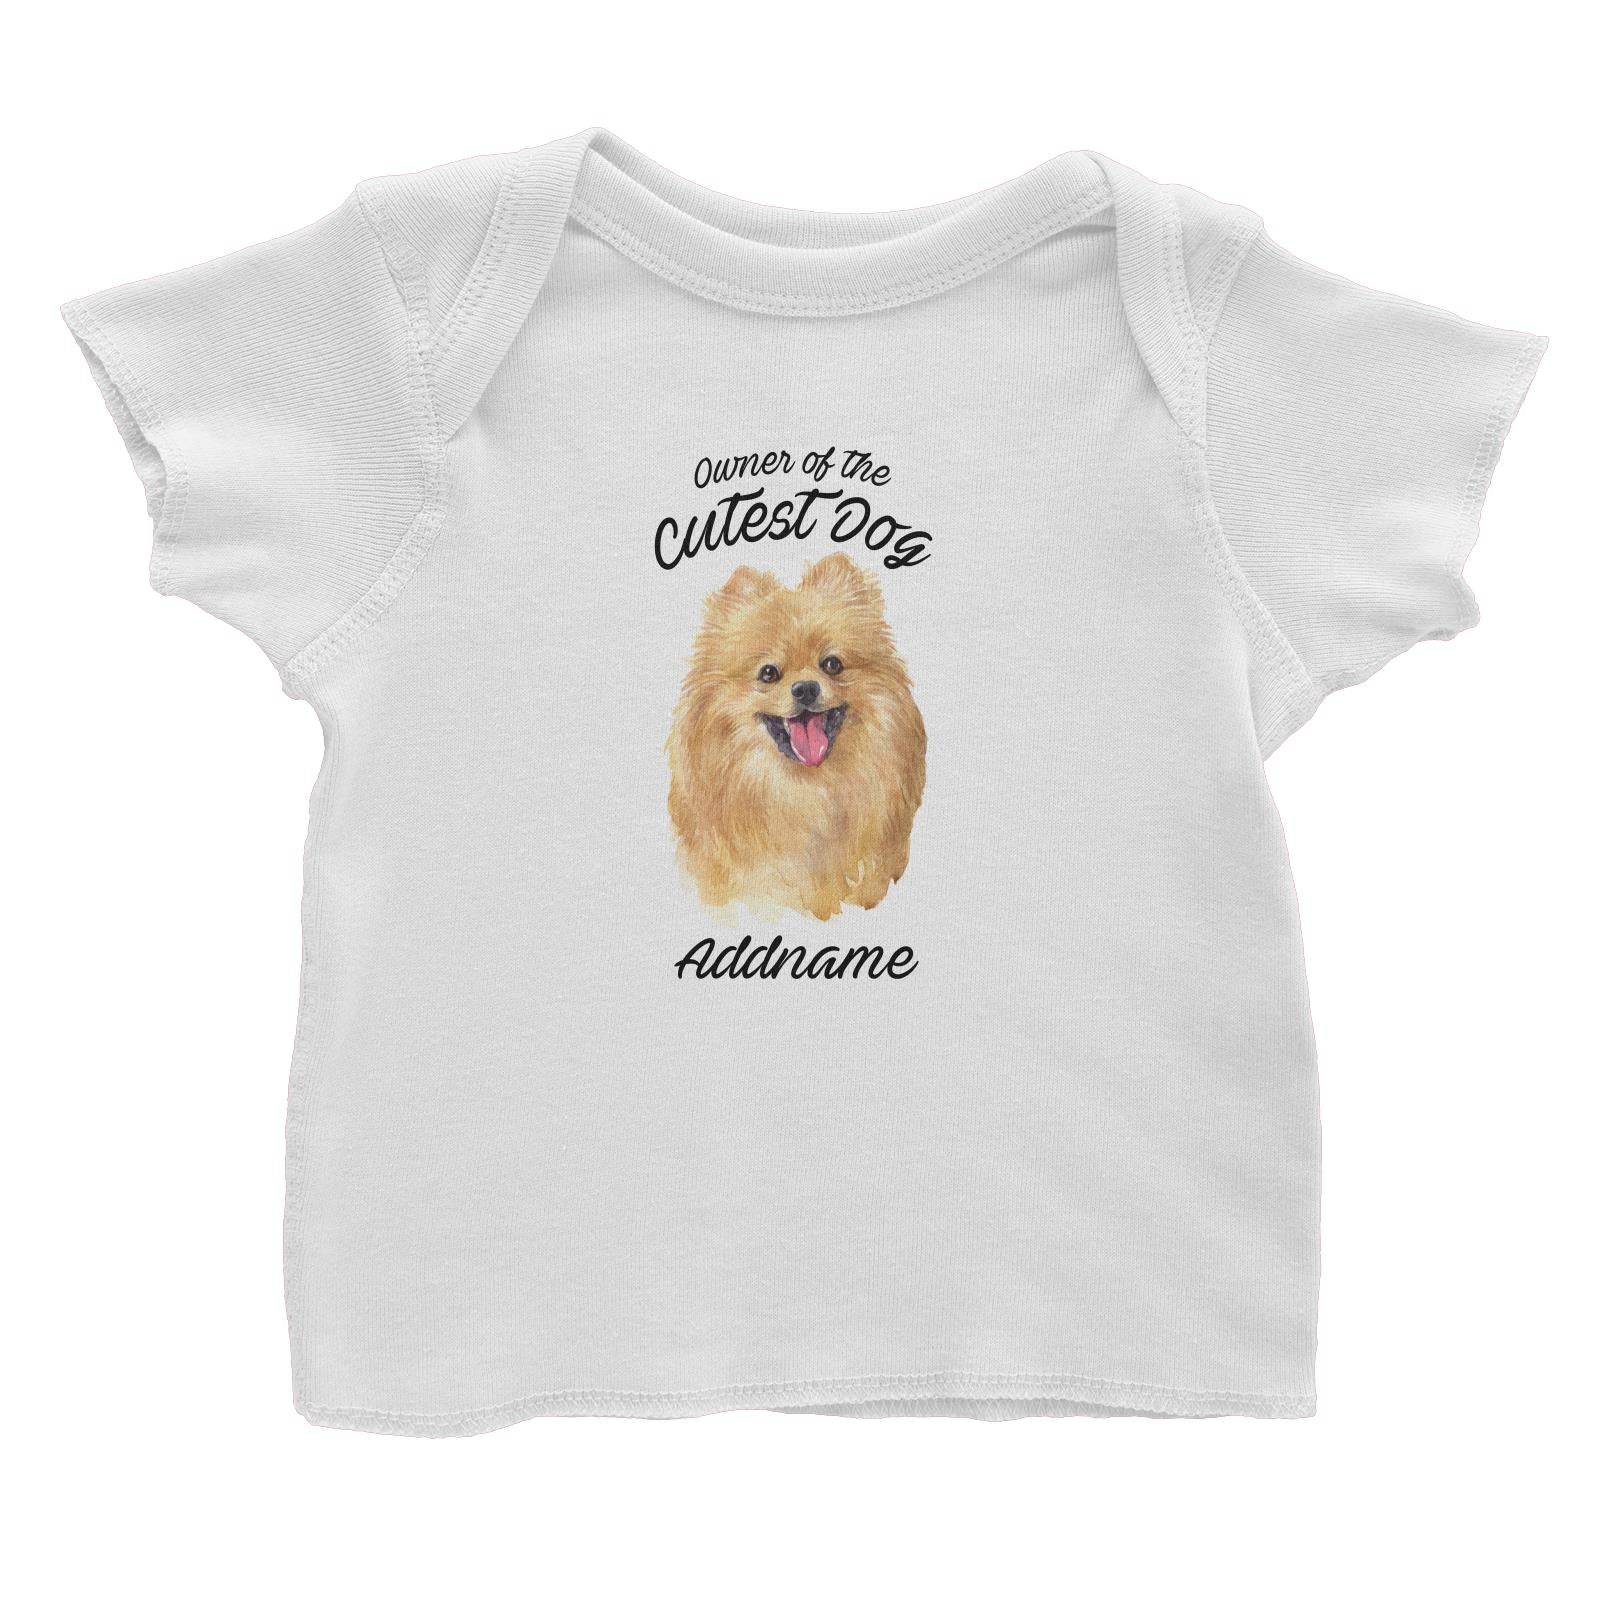 Watercolor Dog Owner Of The Cutest Dog Pomeranian Addname Baby T-Shirt